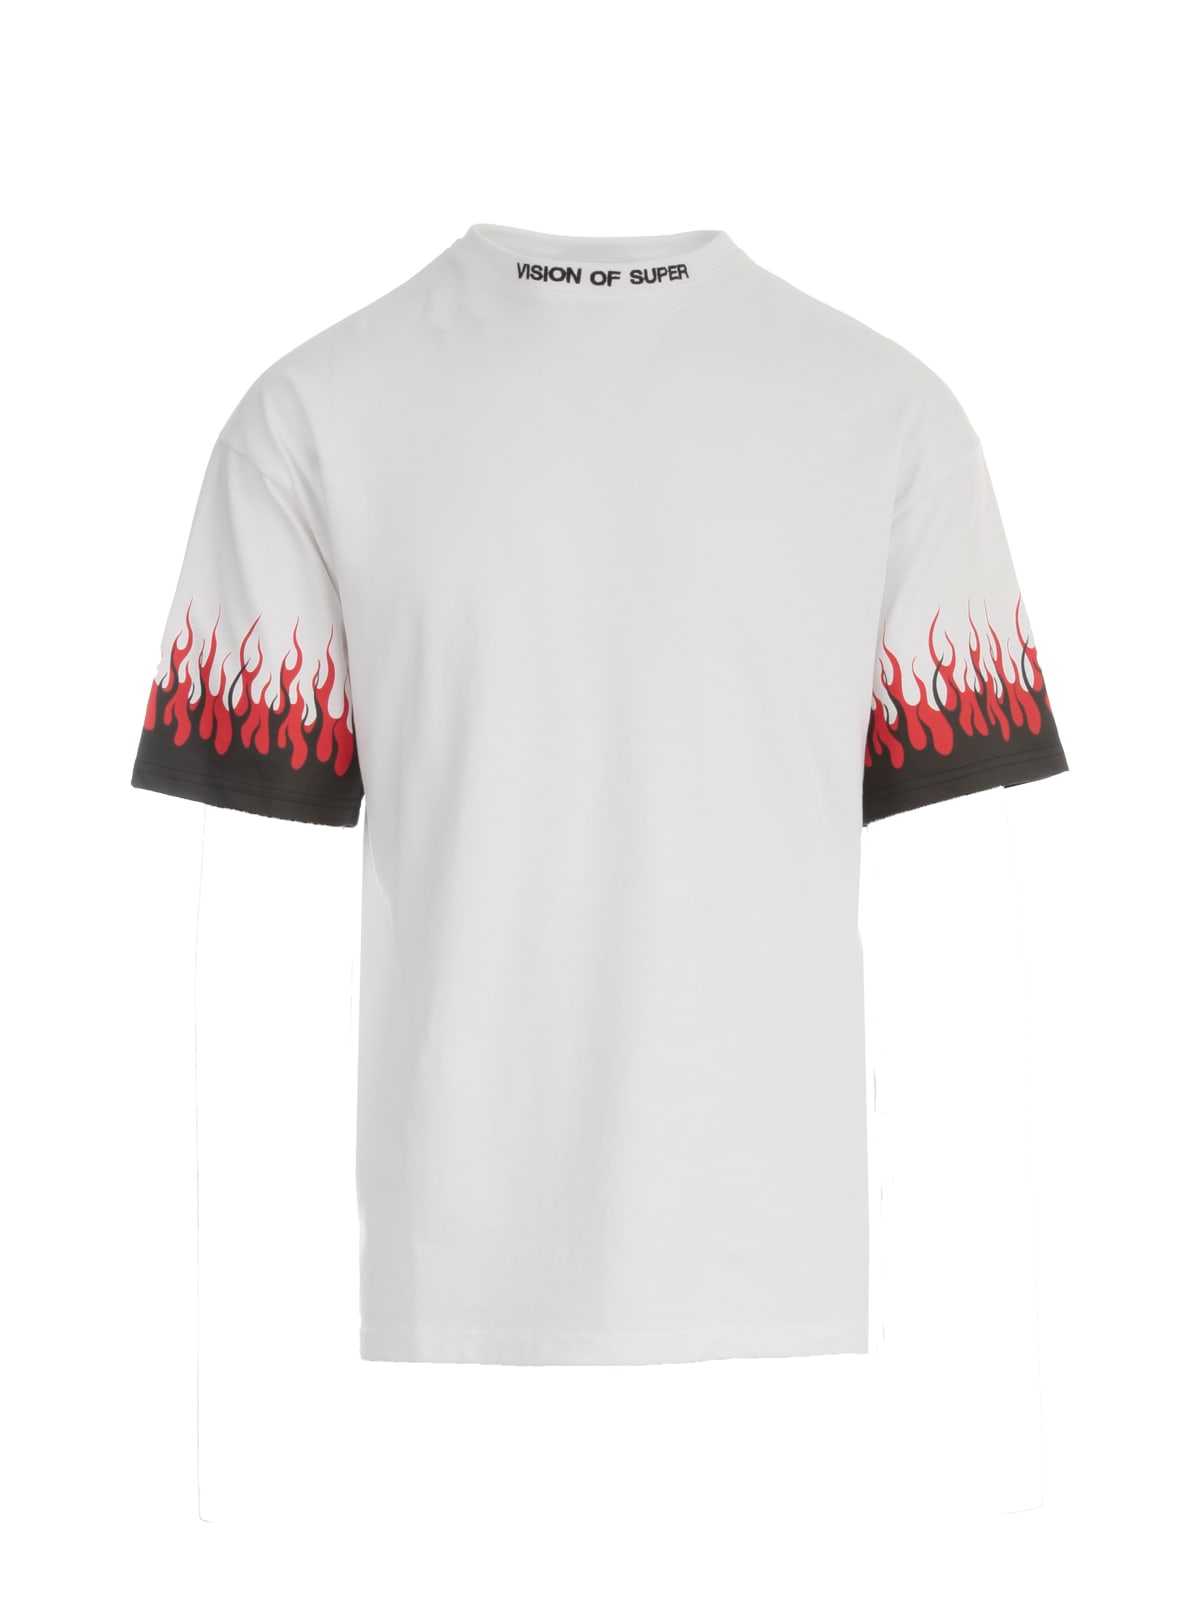 Vision of Super White T-shirt Double Flames